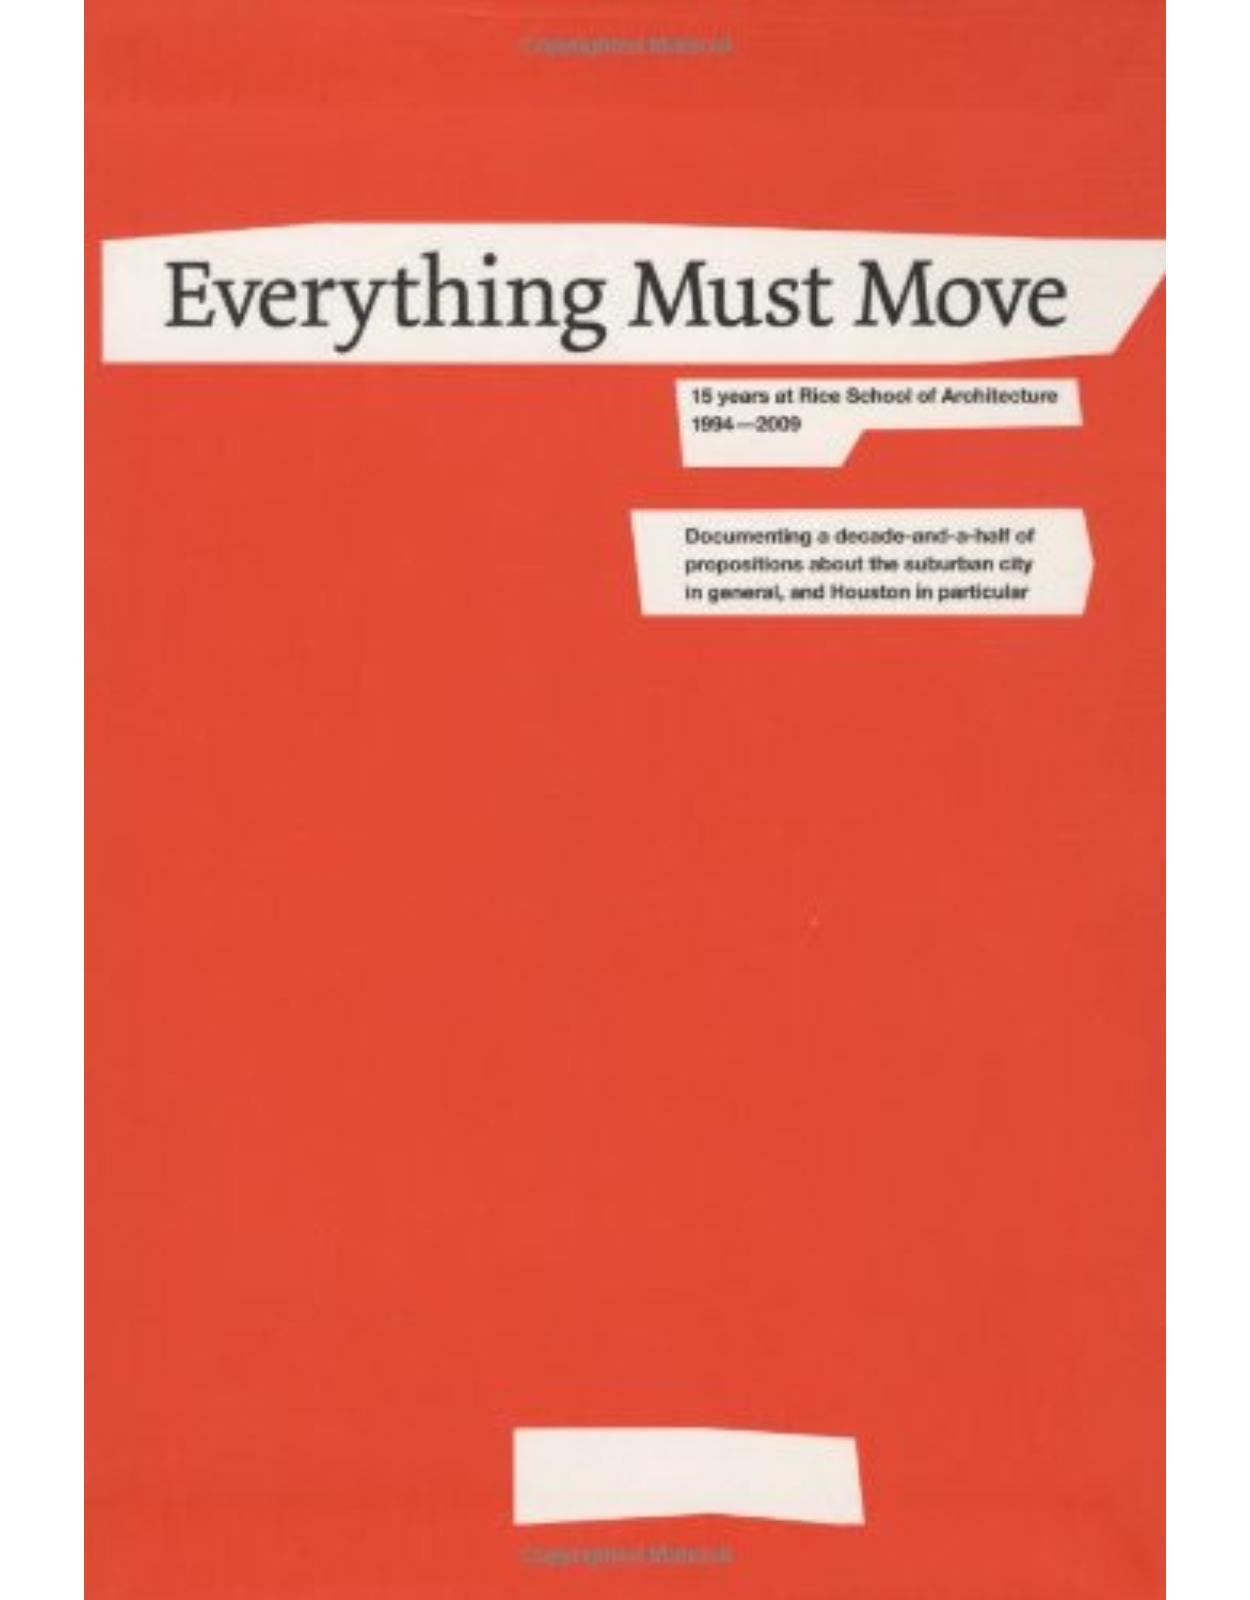 Everything Must Move: 15 Years at Rice School of Architecture 1994-2009